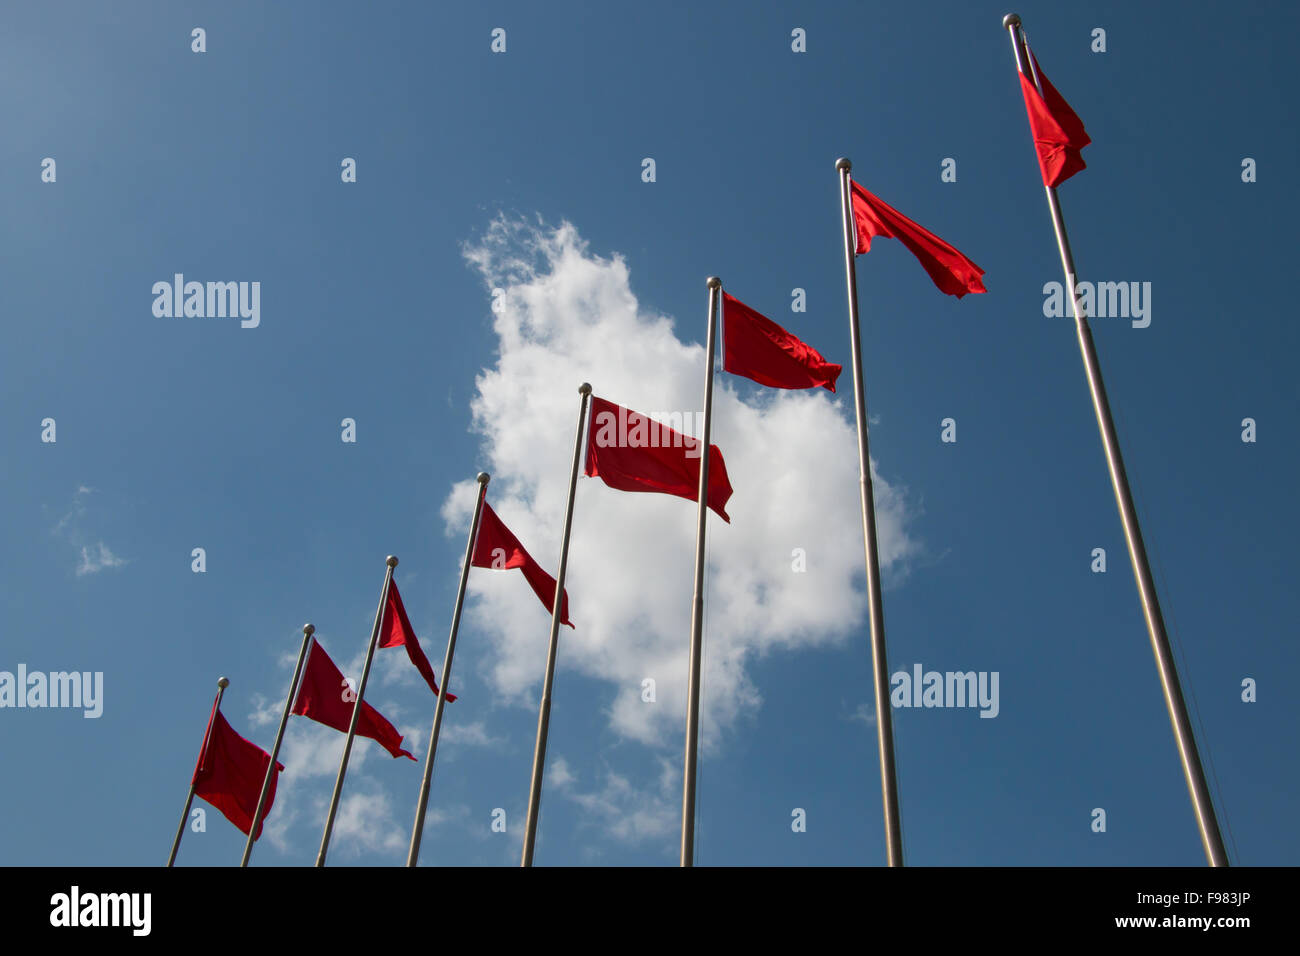 Line of red flags in front of cloudy blue sky in Kashgar China Stock Photo